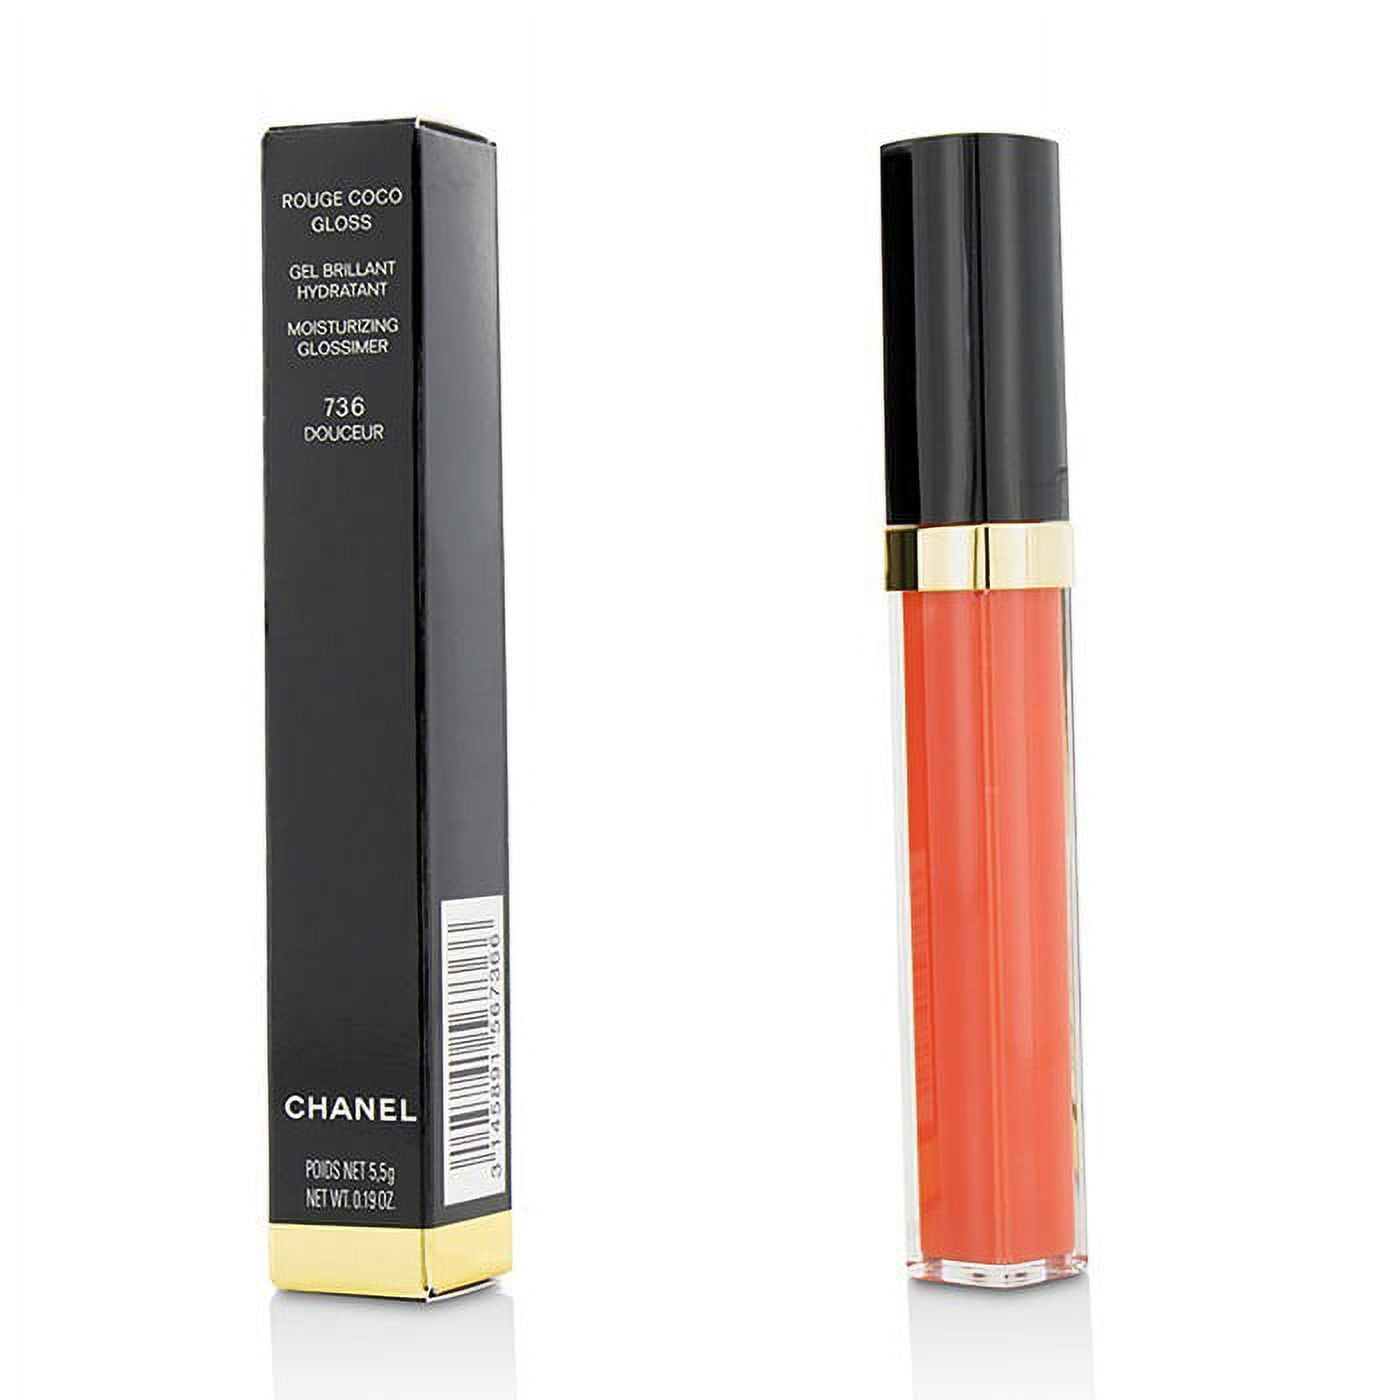 Chanel Rouge Coco Gloss Moisturizing Glossimer - # 736 Douceur